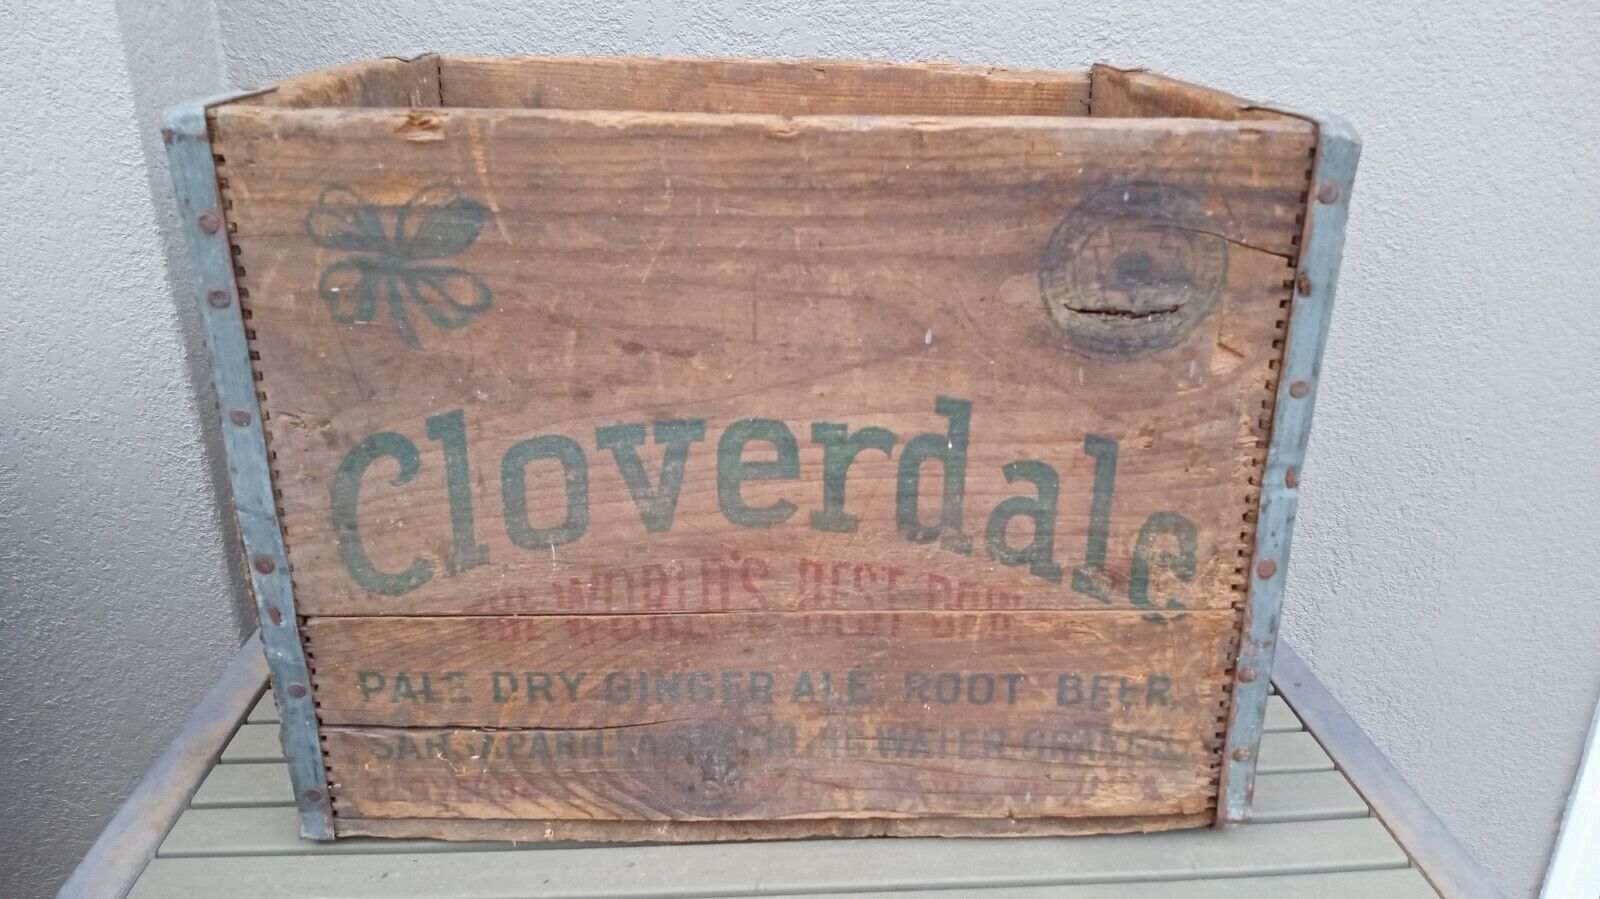 VINTAGE CLOVERDALE GINGER ALE, Baltimore MD WOOD BOX SODA ADVERTISING CRATE